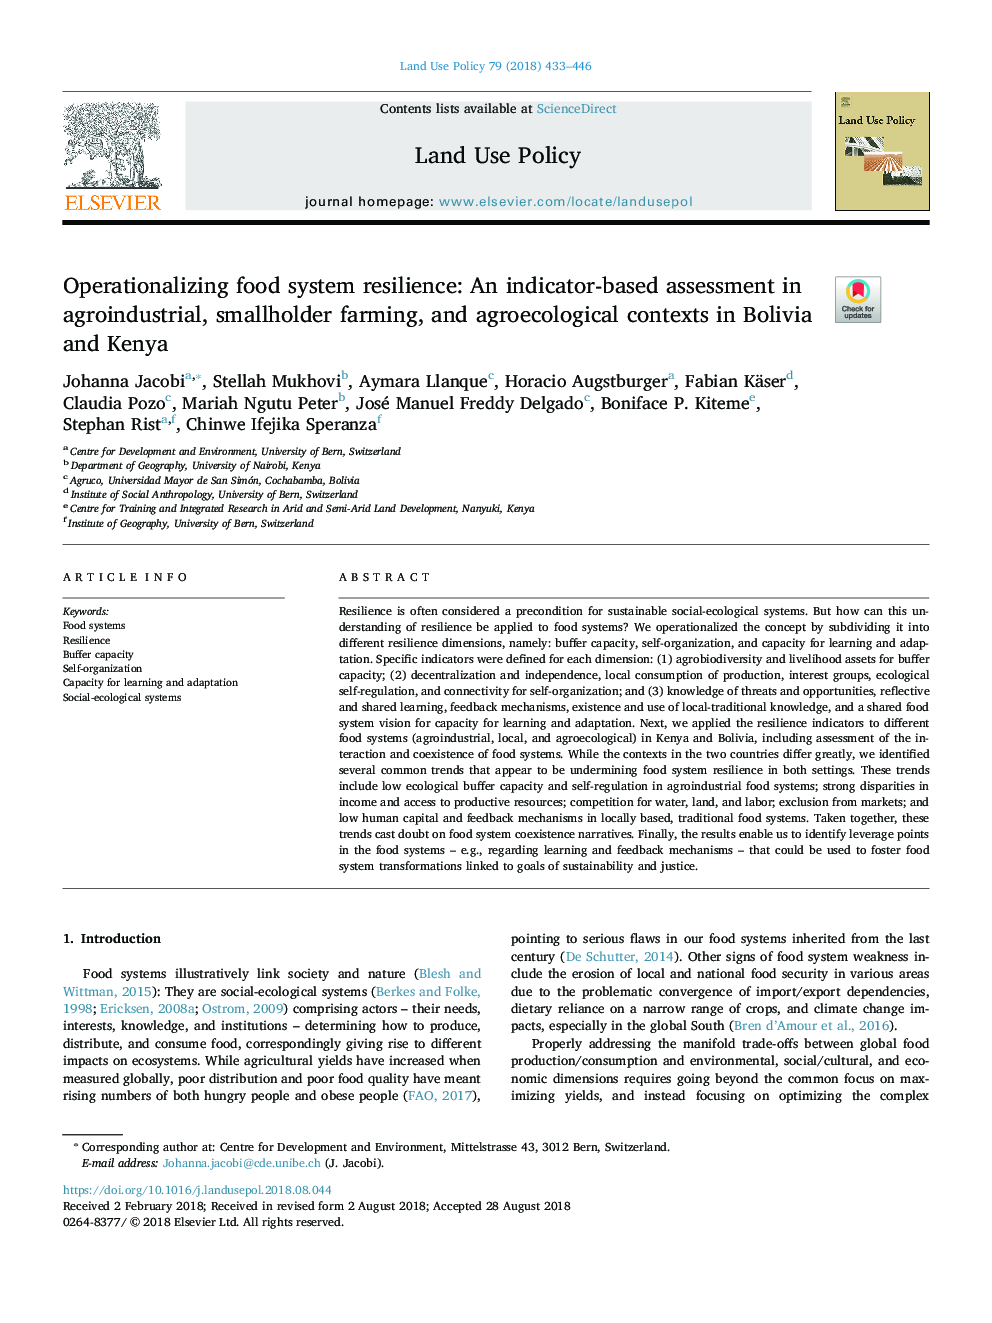 Operationalizing food system resilience: An indicator-based assessment in agroindustrial, smallholder farming, and agroecological contexts in Bolivia and Kenya